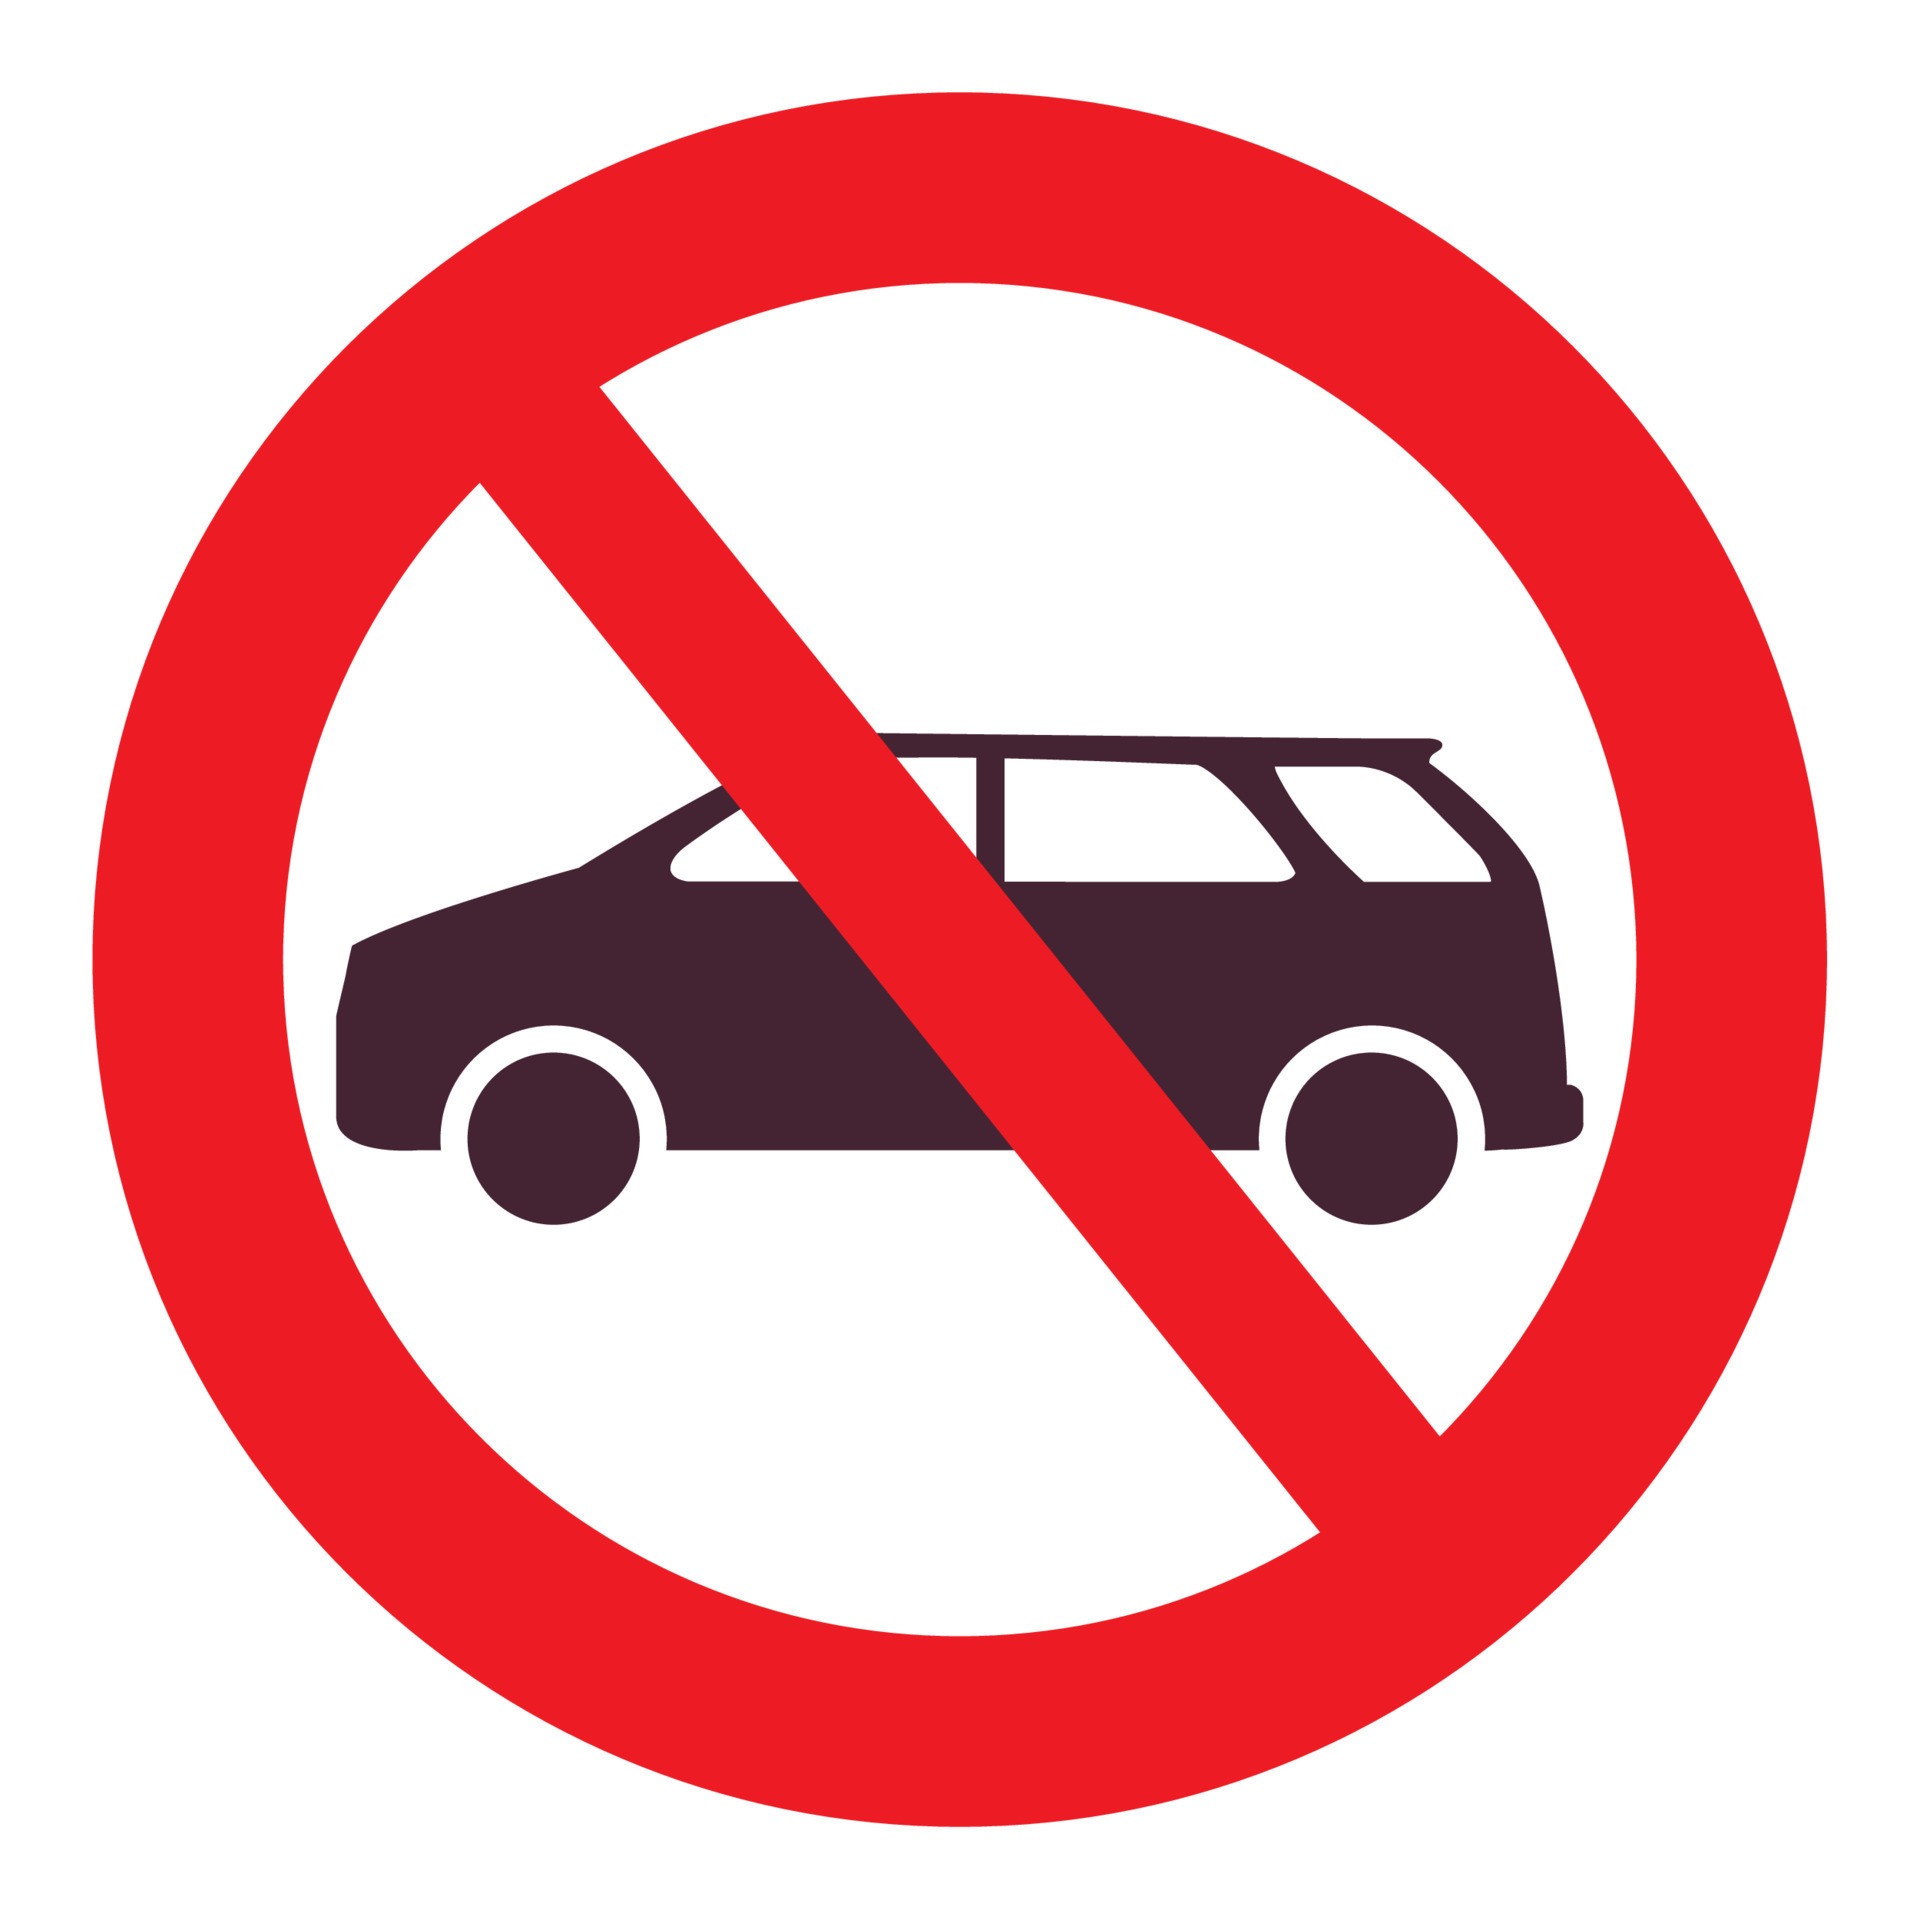 https://static.vecteezy.com/system/resources/previews/010/801/046/original/no-car-allowed-sign-no-parking-car-icon-traffic-parking-ban-prohibited-sign-isolated-on-white-background-flat-illustration-vector.jpg